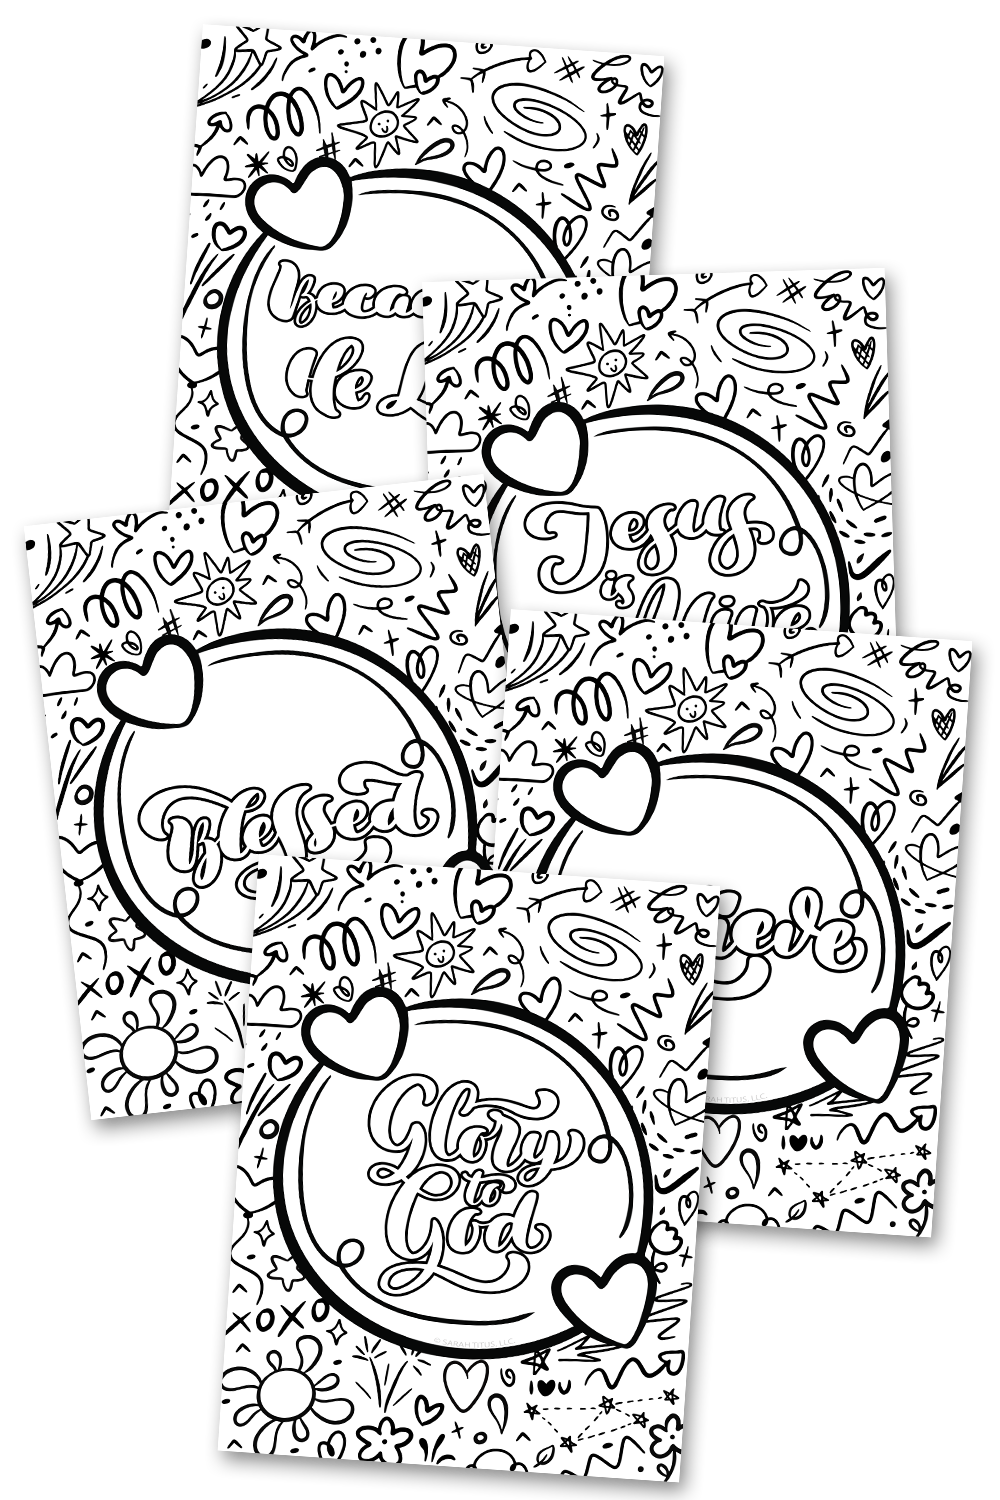 Glory to God Colorable Binder Covers